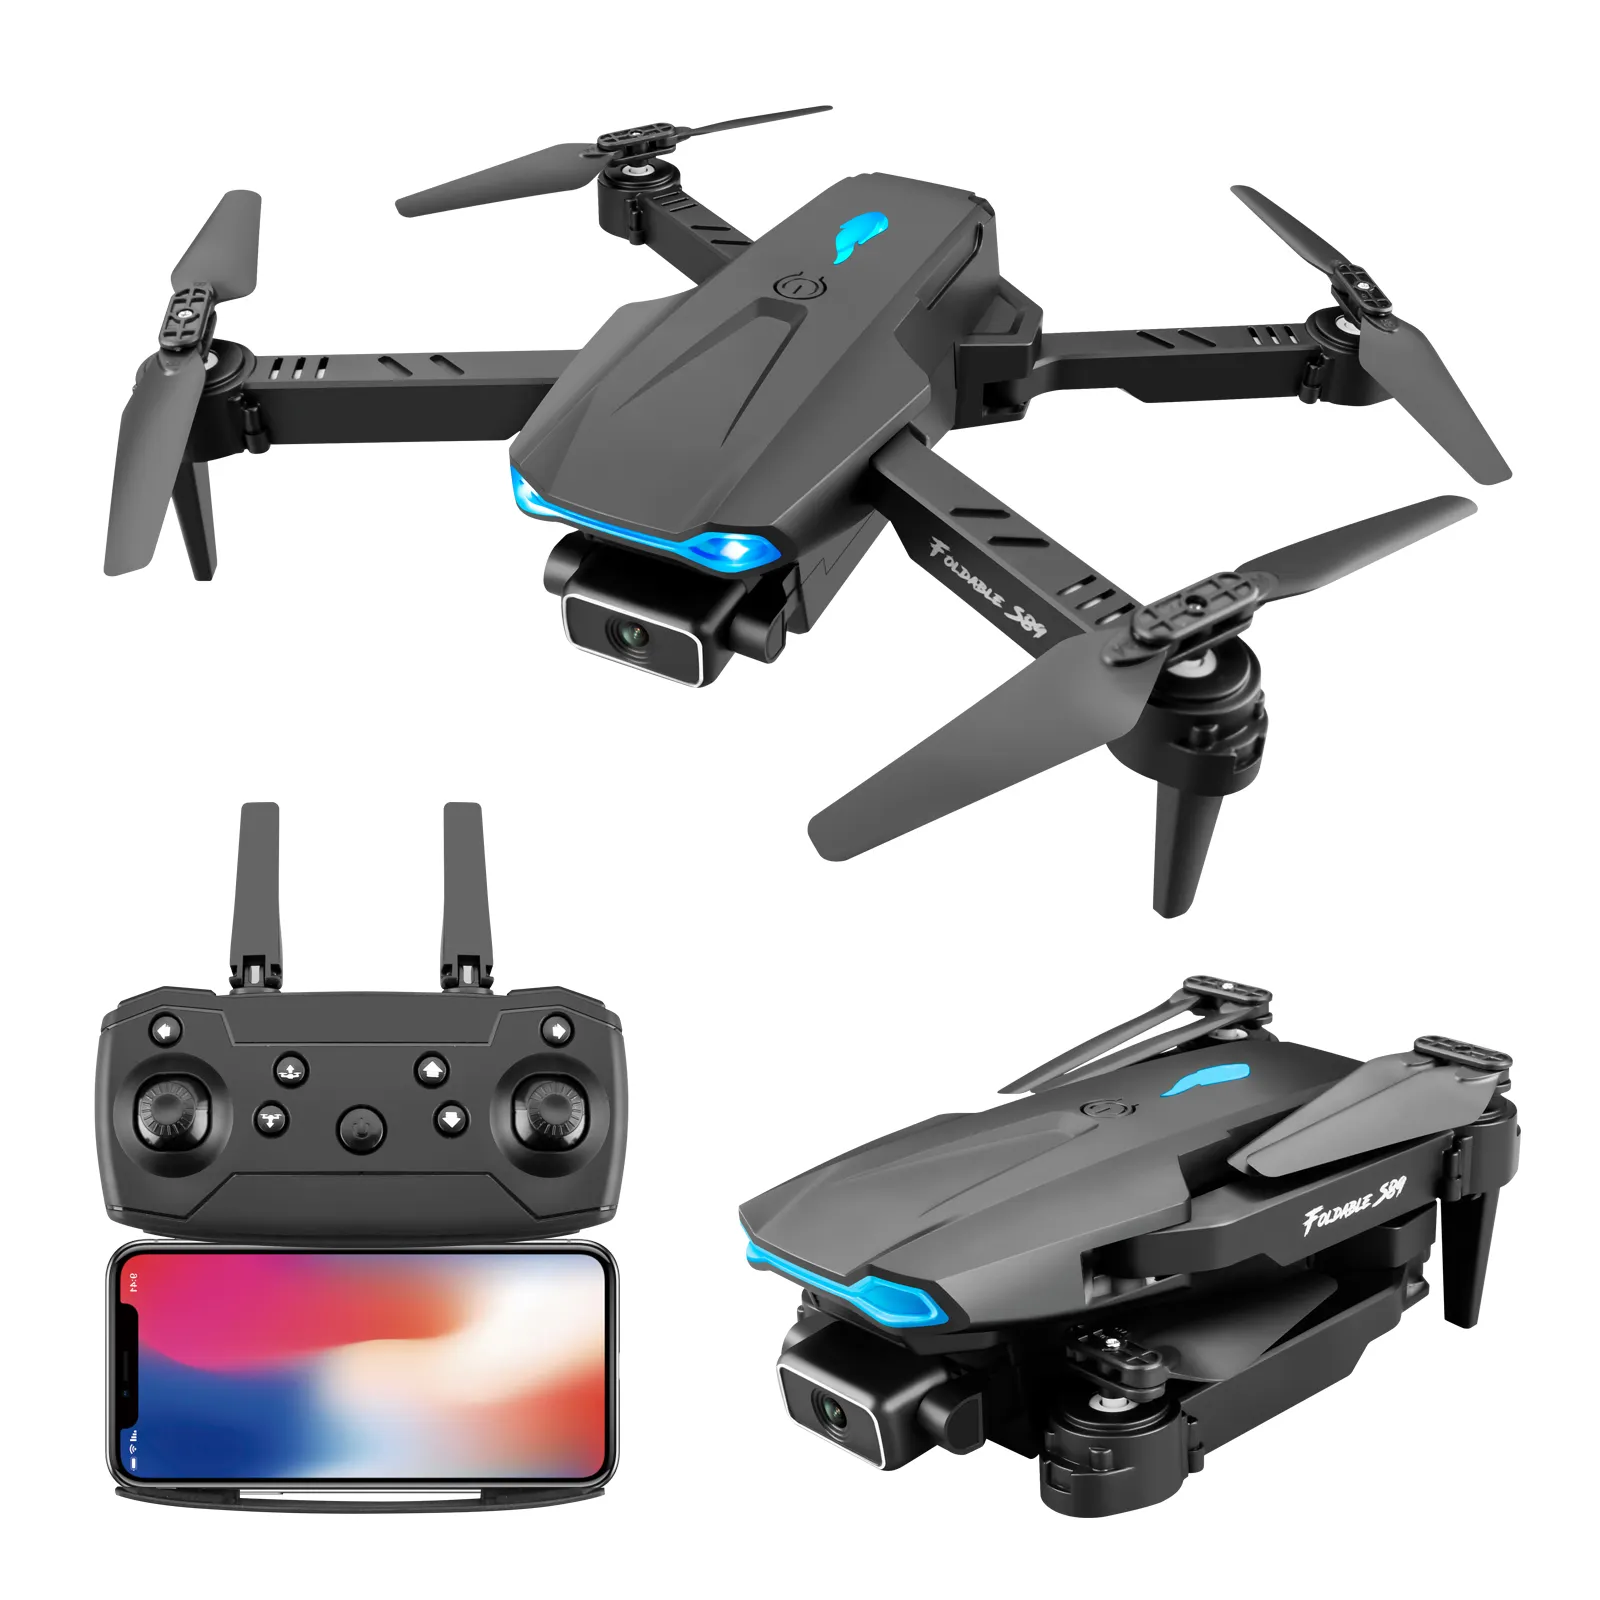 Dropshipping 2021 New S89 pro Drone 4k HD Dual Camera 1080P WiFi Fpv Visual Positioning Dron Height Preservation Rc Quadcopter VS V4 Drone